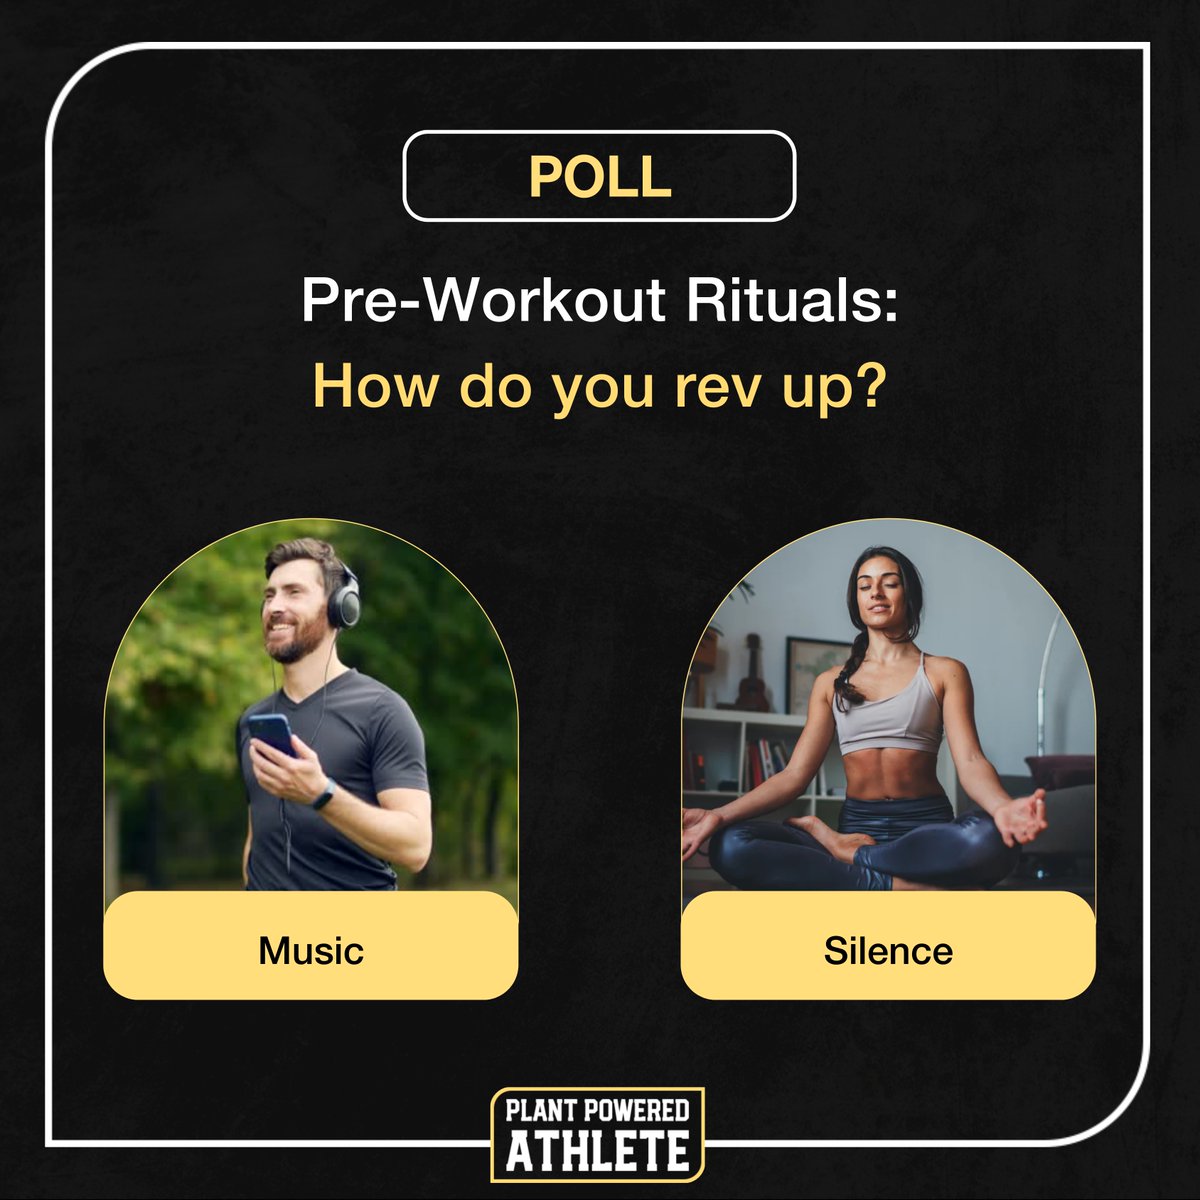 Time to tune in before you tone up! 🎧🧘 

Do you get amped with a playlist or do you center yourself in stillness before crushing your workout? 

Cast your vote and share your pre-workout ritual with us!

#plantpoweredathlete #plantbasedprotein #plantbasedcoach #plantpowered...